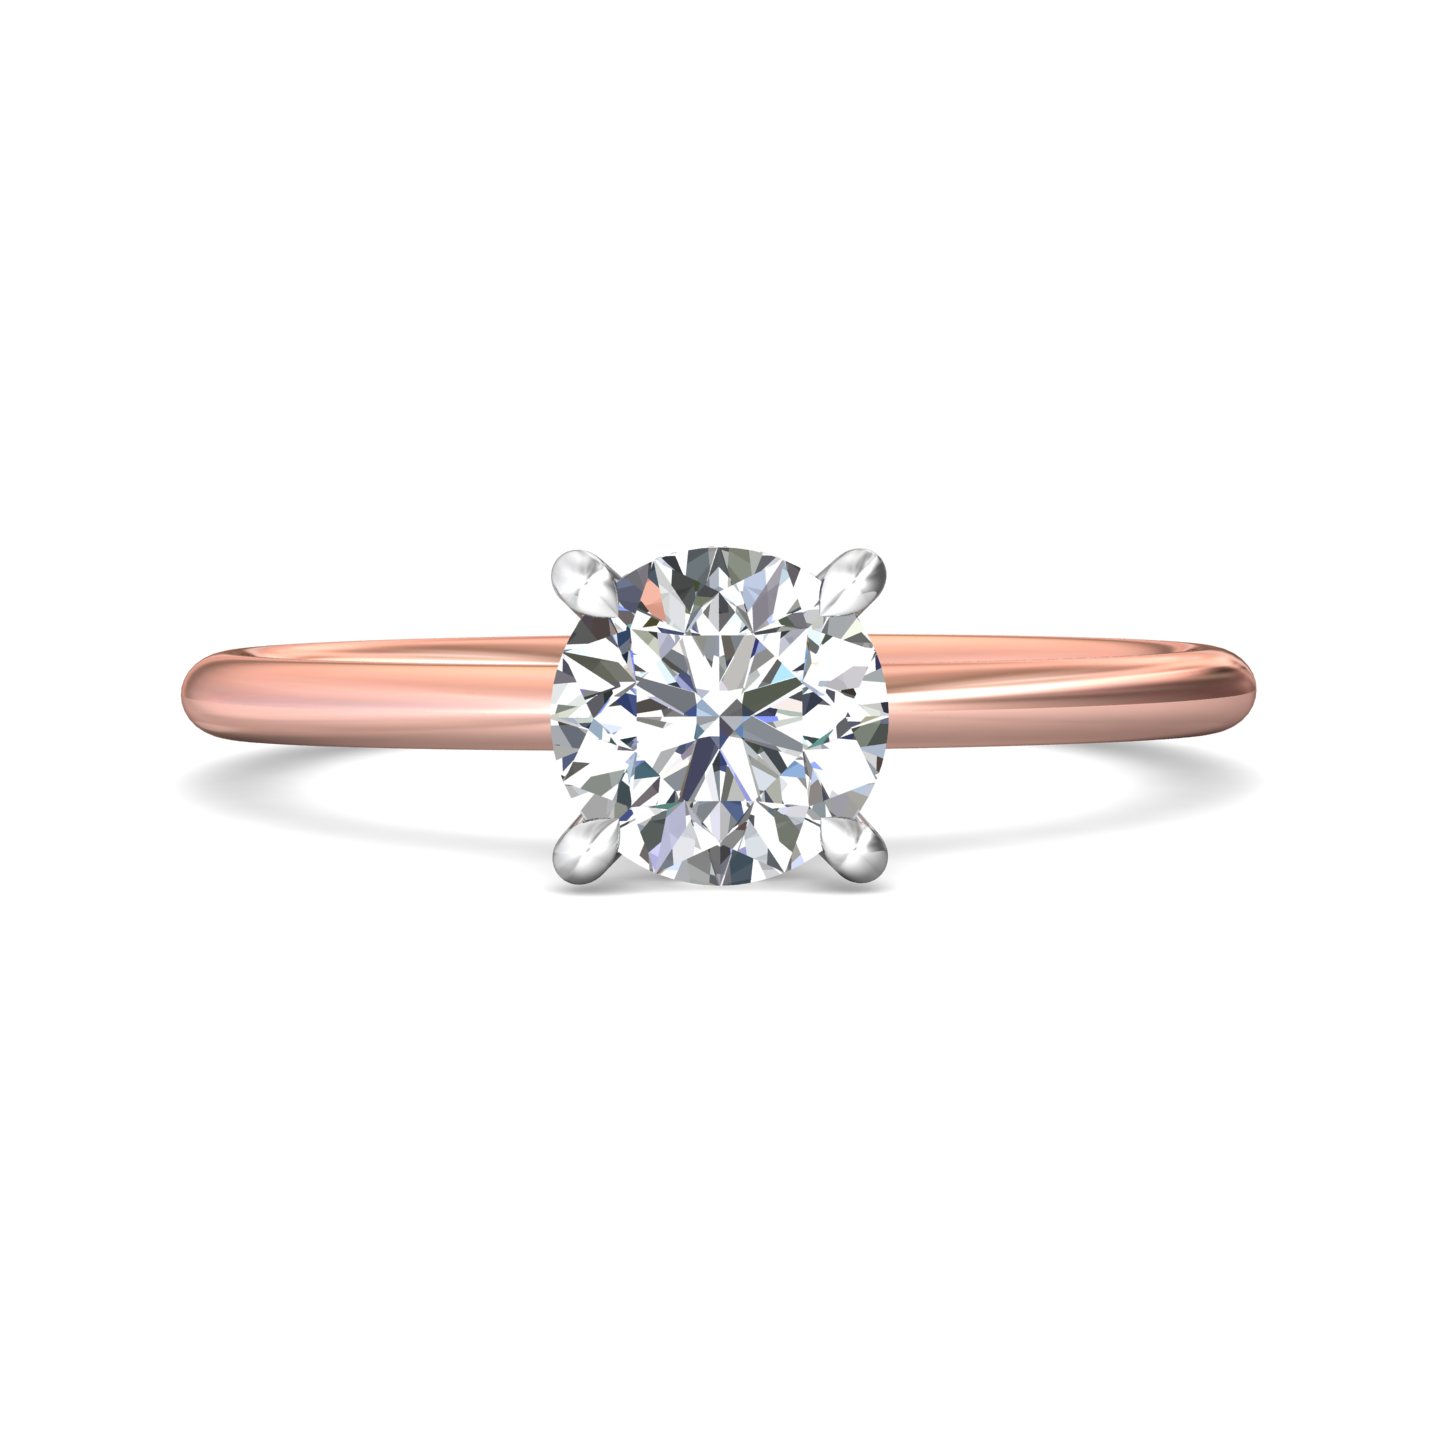 14K WHITE & ROSE GOLD FLYER FIT SEMI-MOUNT RING SIZE 6.5 WITH 12=0.03TW ROUND H-I SI2 DIAMONDS